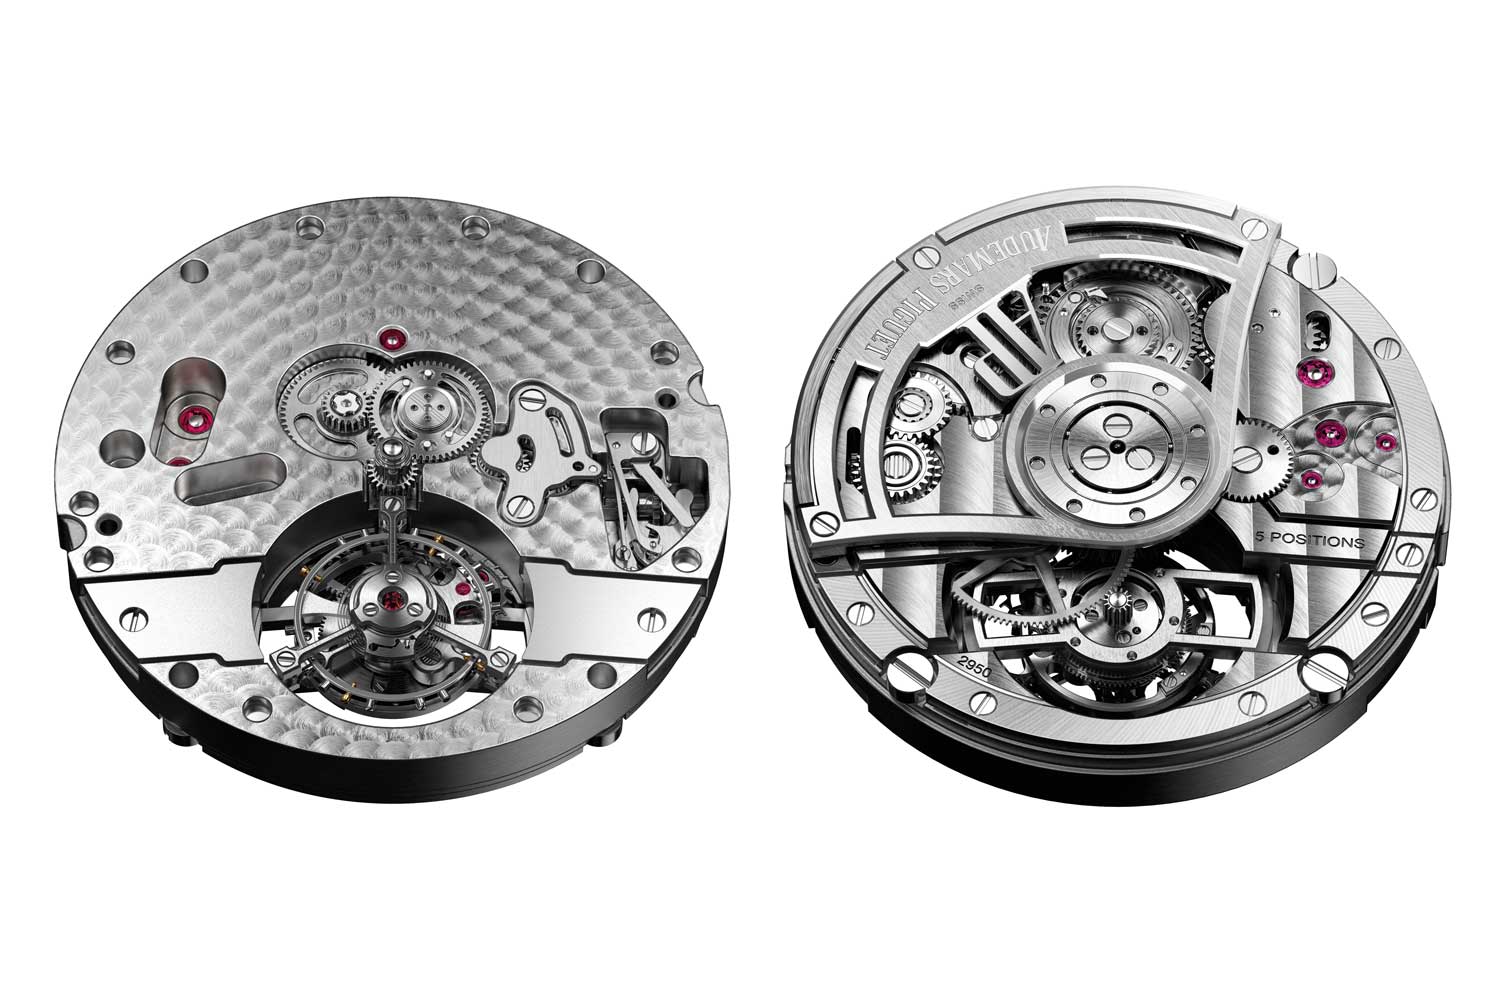 Front and back view of the caliber 2950 — note that the motion works are located above the central axis of the movement, ensuring that there are no wheels obstructing the view of the tourbillon cage at six o’clock